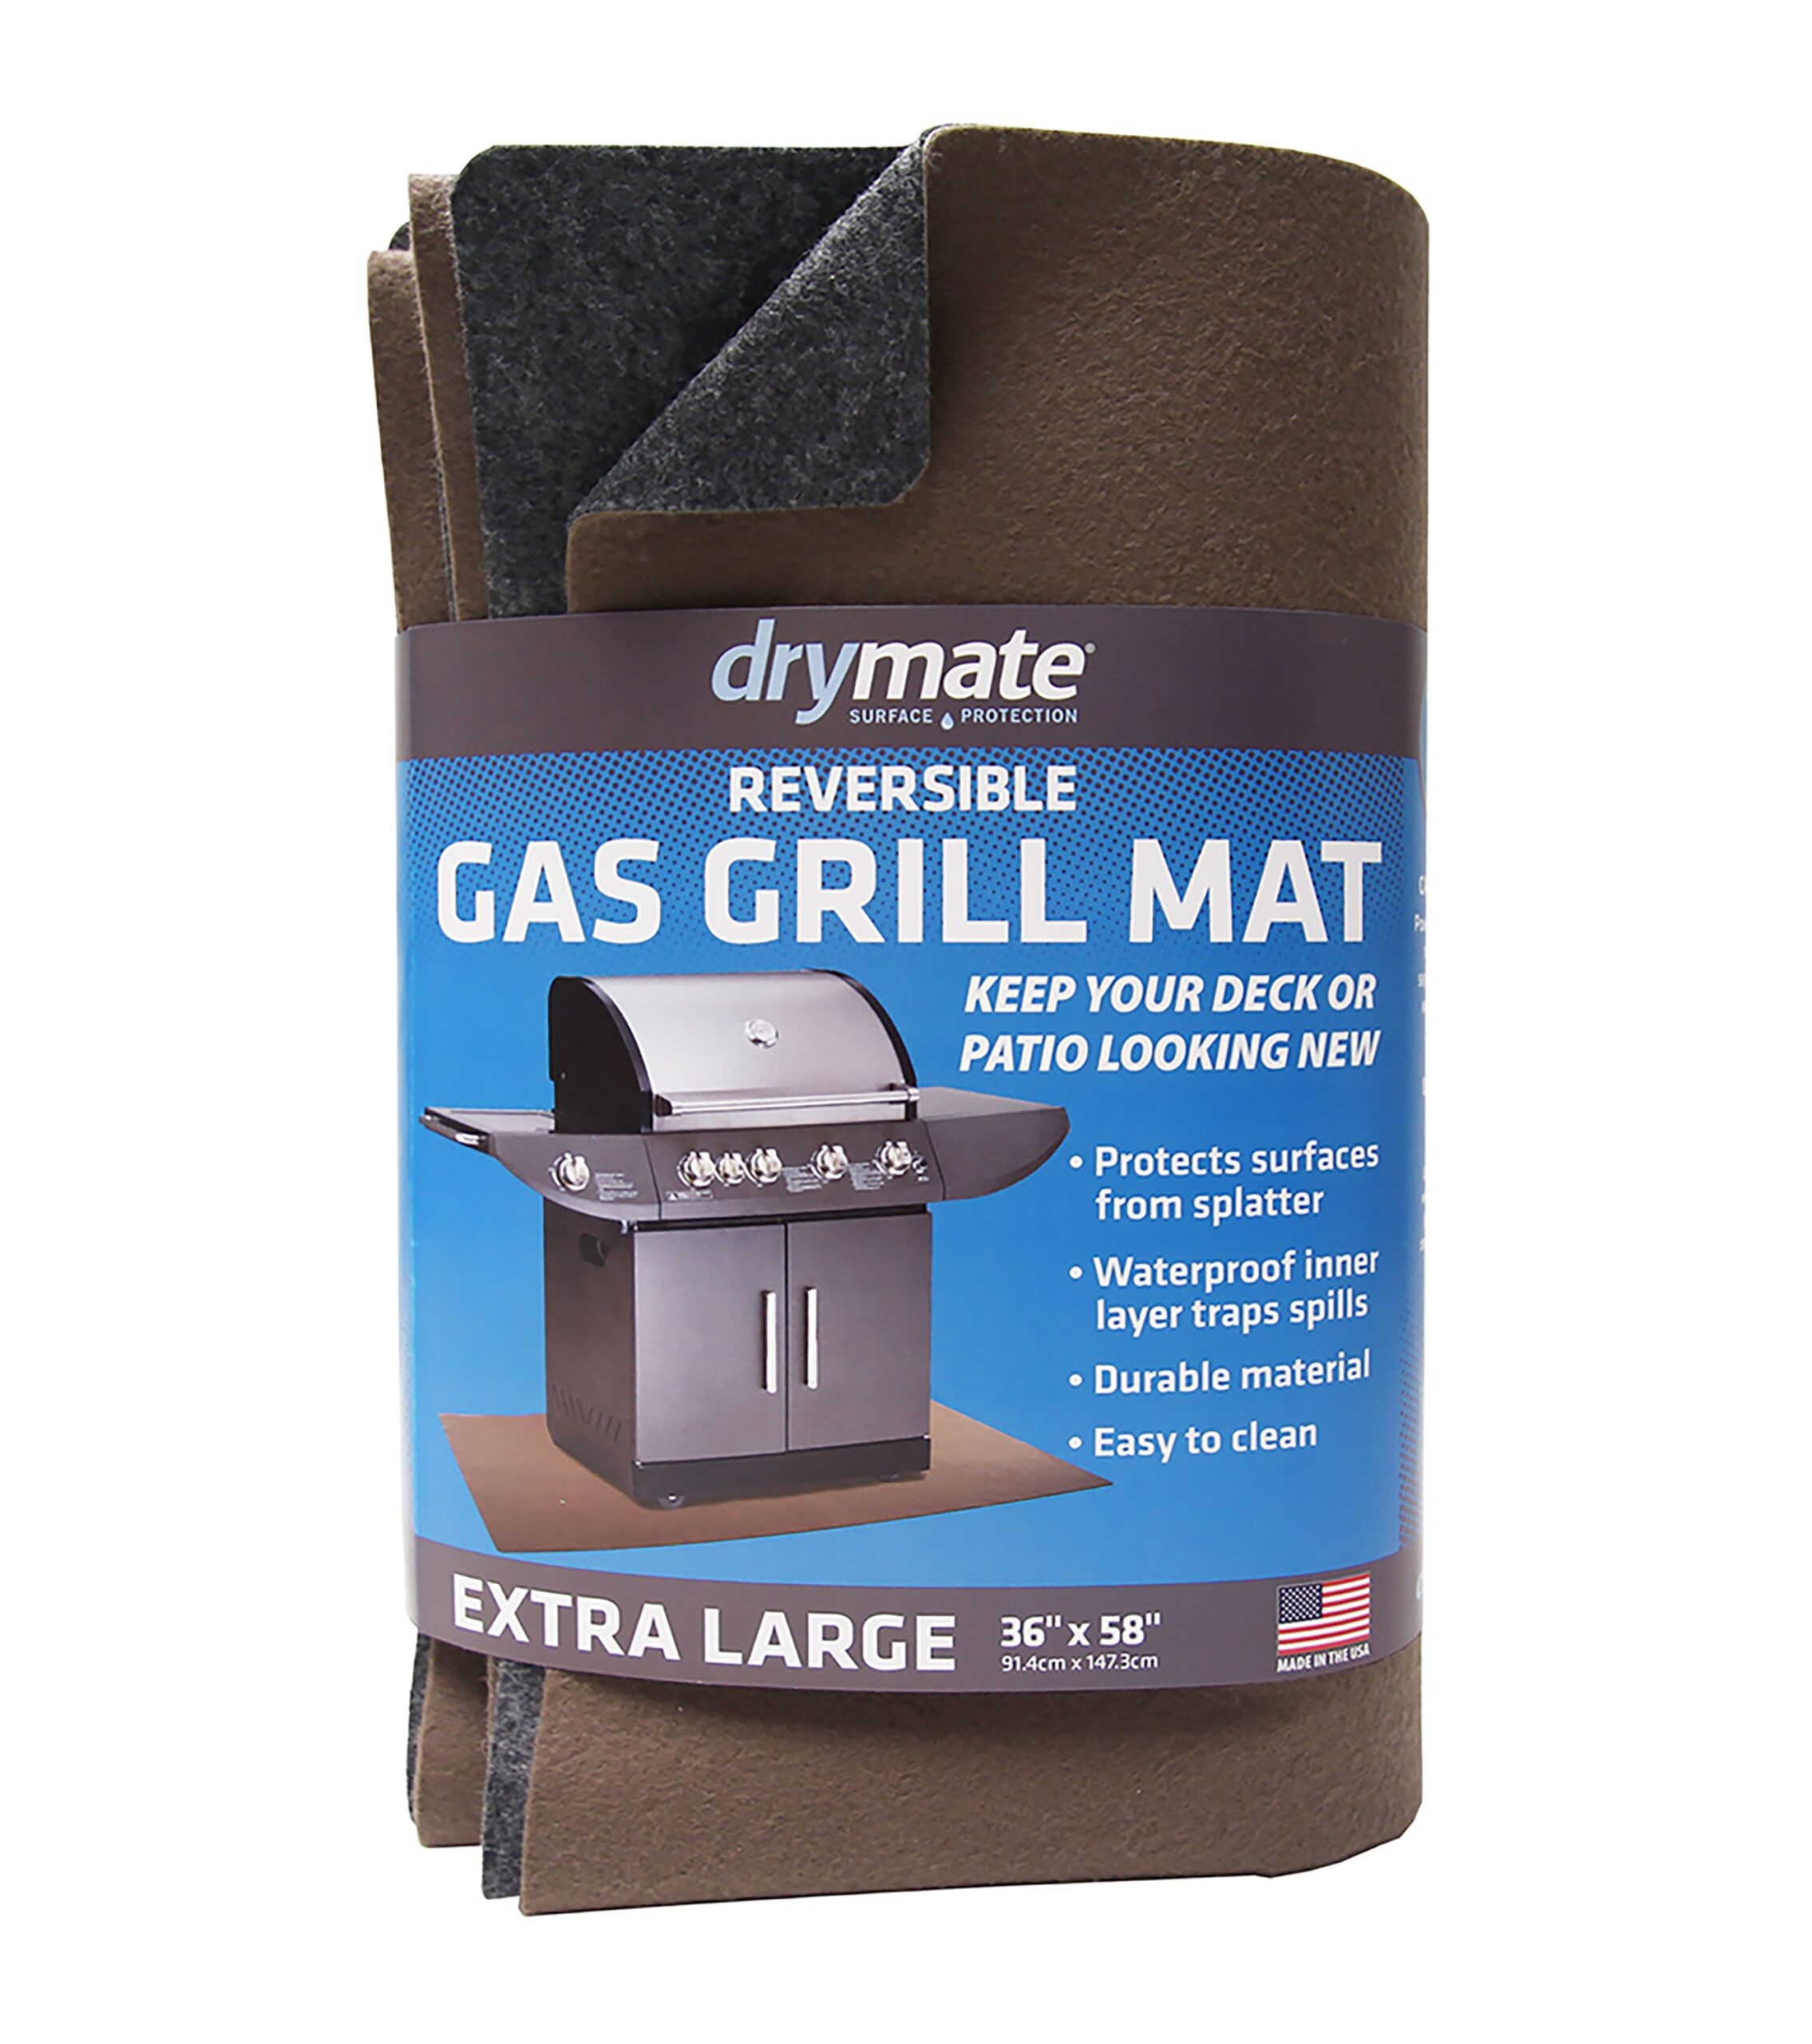 Premium Grill Pad 30” x 58” Protects Decks/Patios from Grease Splatter and Other Messes Drymate Gas Grill Mat X Large 